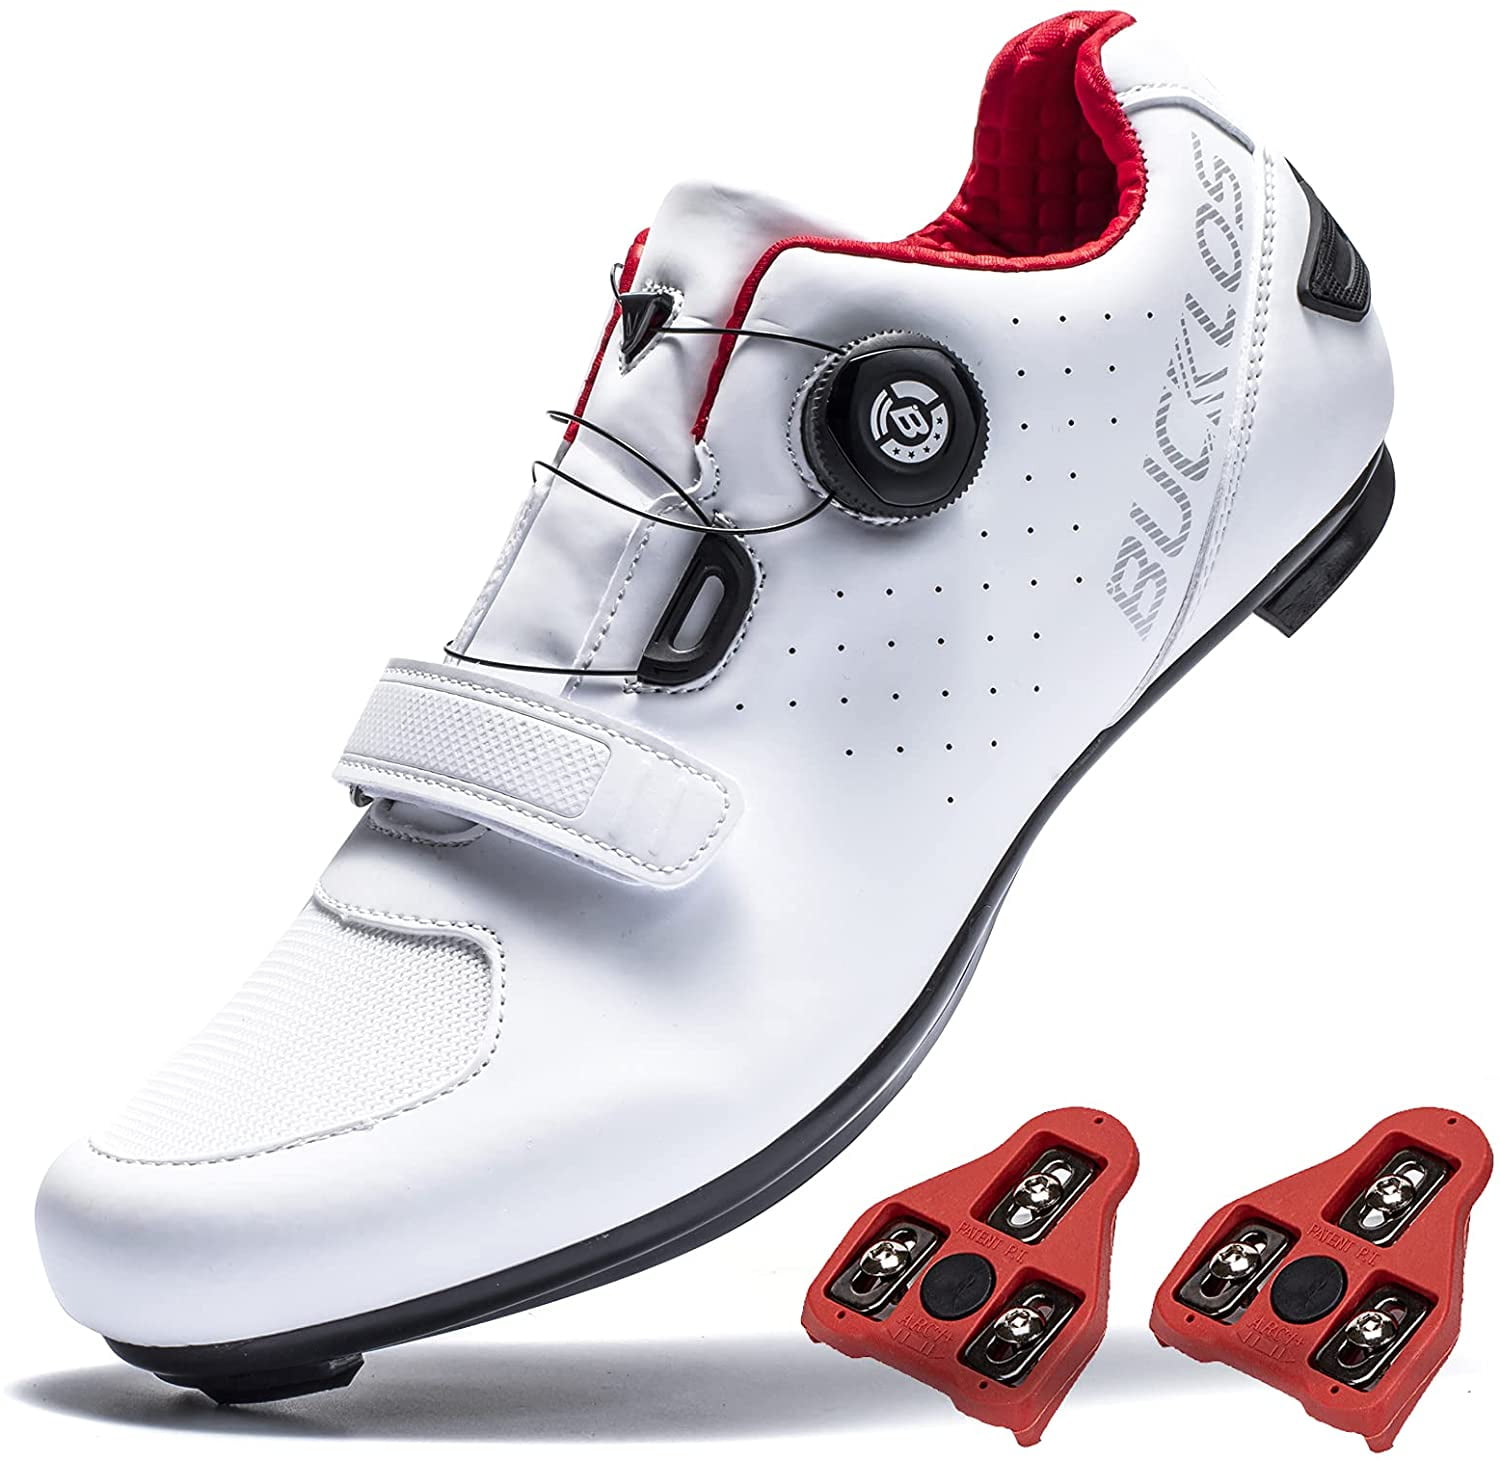 Unisex Mens Womens Road Bike Cycling Shoes,Indoor Bike Shoes Compatible with Look Delta/SPD Cleats,Perfect for Road Racing Bikes-3 Straps 